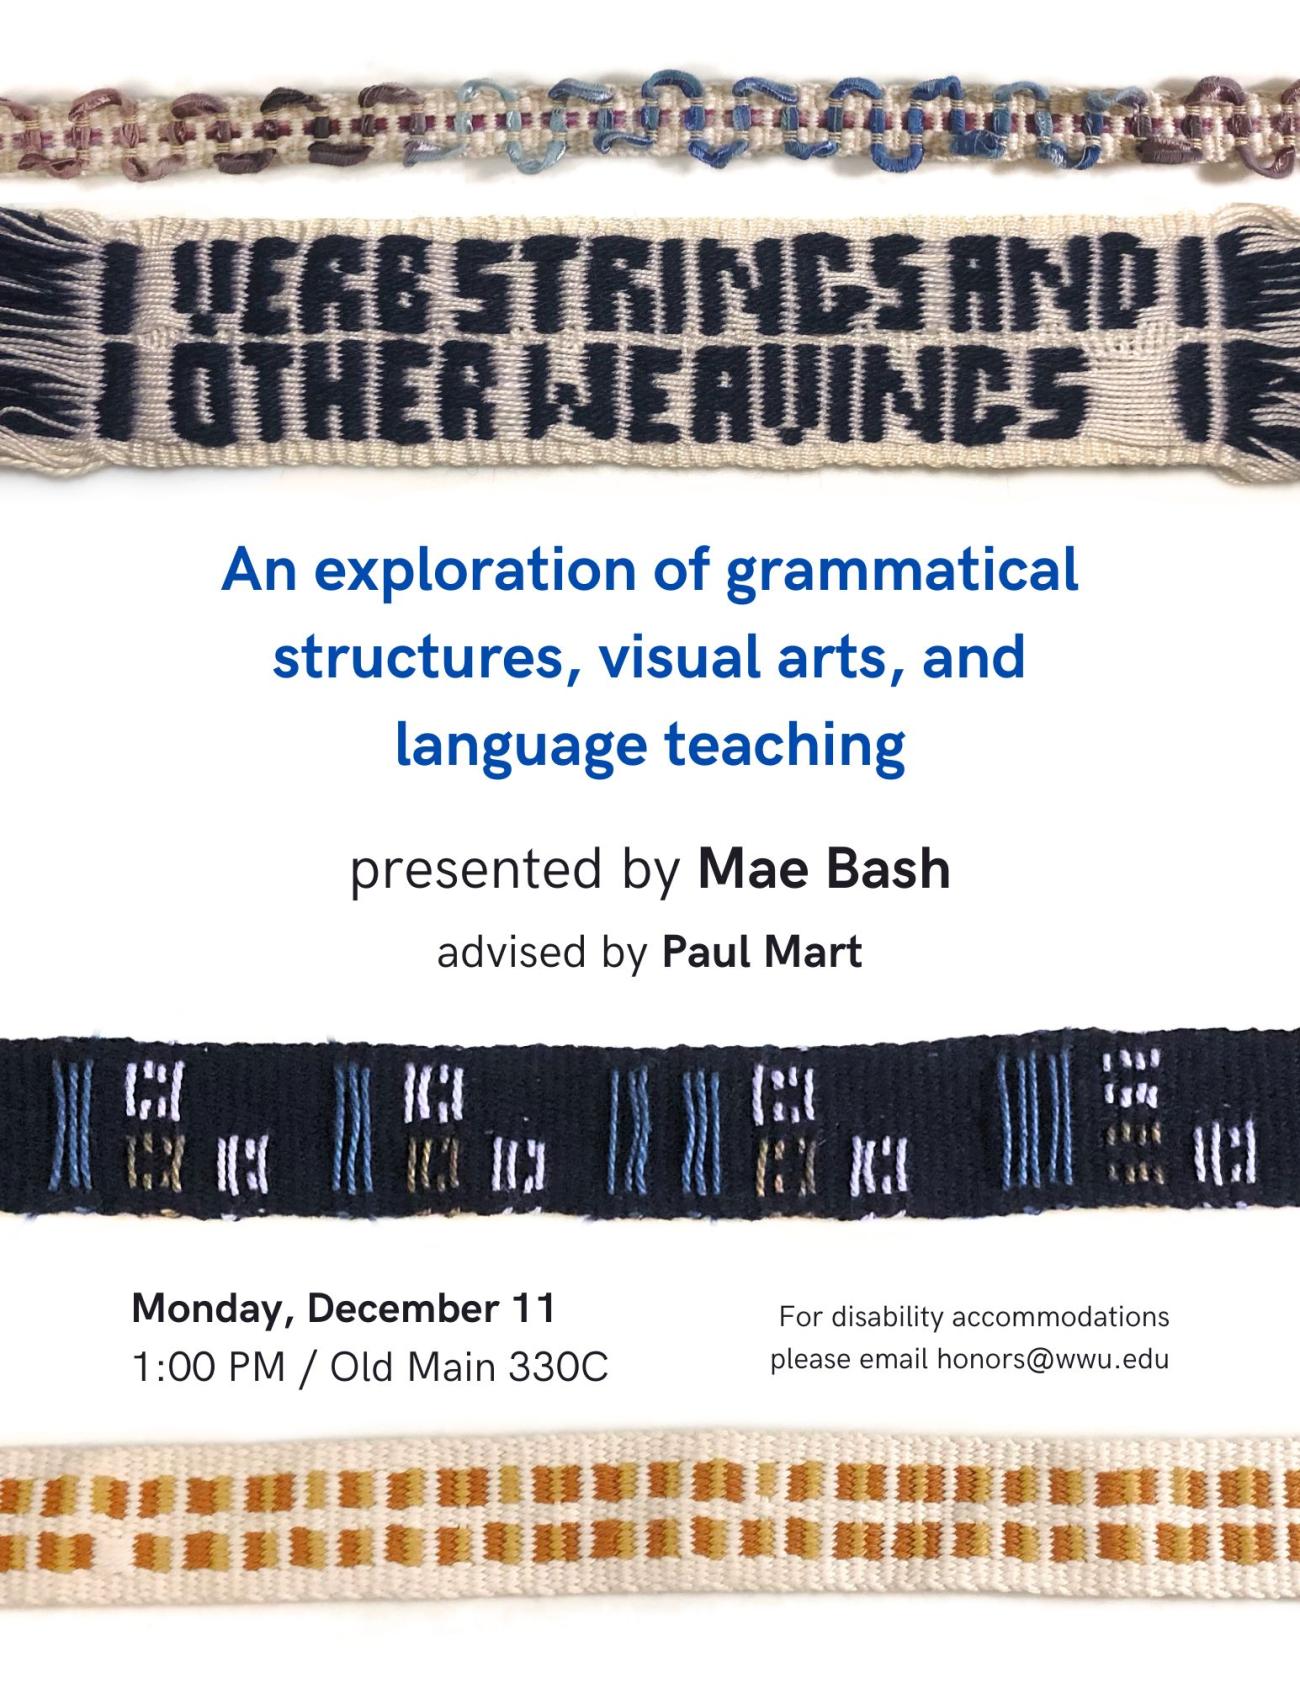 White background with four multicolored, handwoven ribbons. One of the ribbons has the title woven into it: "Verb Strings and Other Weavings."  Text reads "An exploration of grammatical strucutres, visual arts, and language teaching. Presented by Mae Bash. Advised by Paul Mart. Monday, December 11 at 1:00PM in Old Main 330C. For disability accommodations please email honors@wwu.edu."